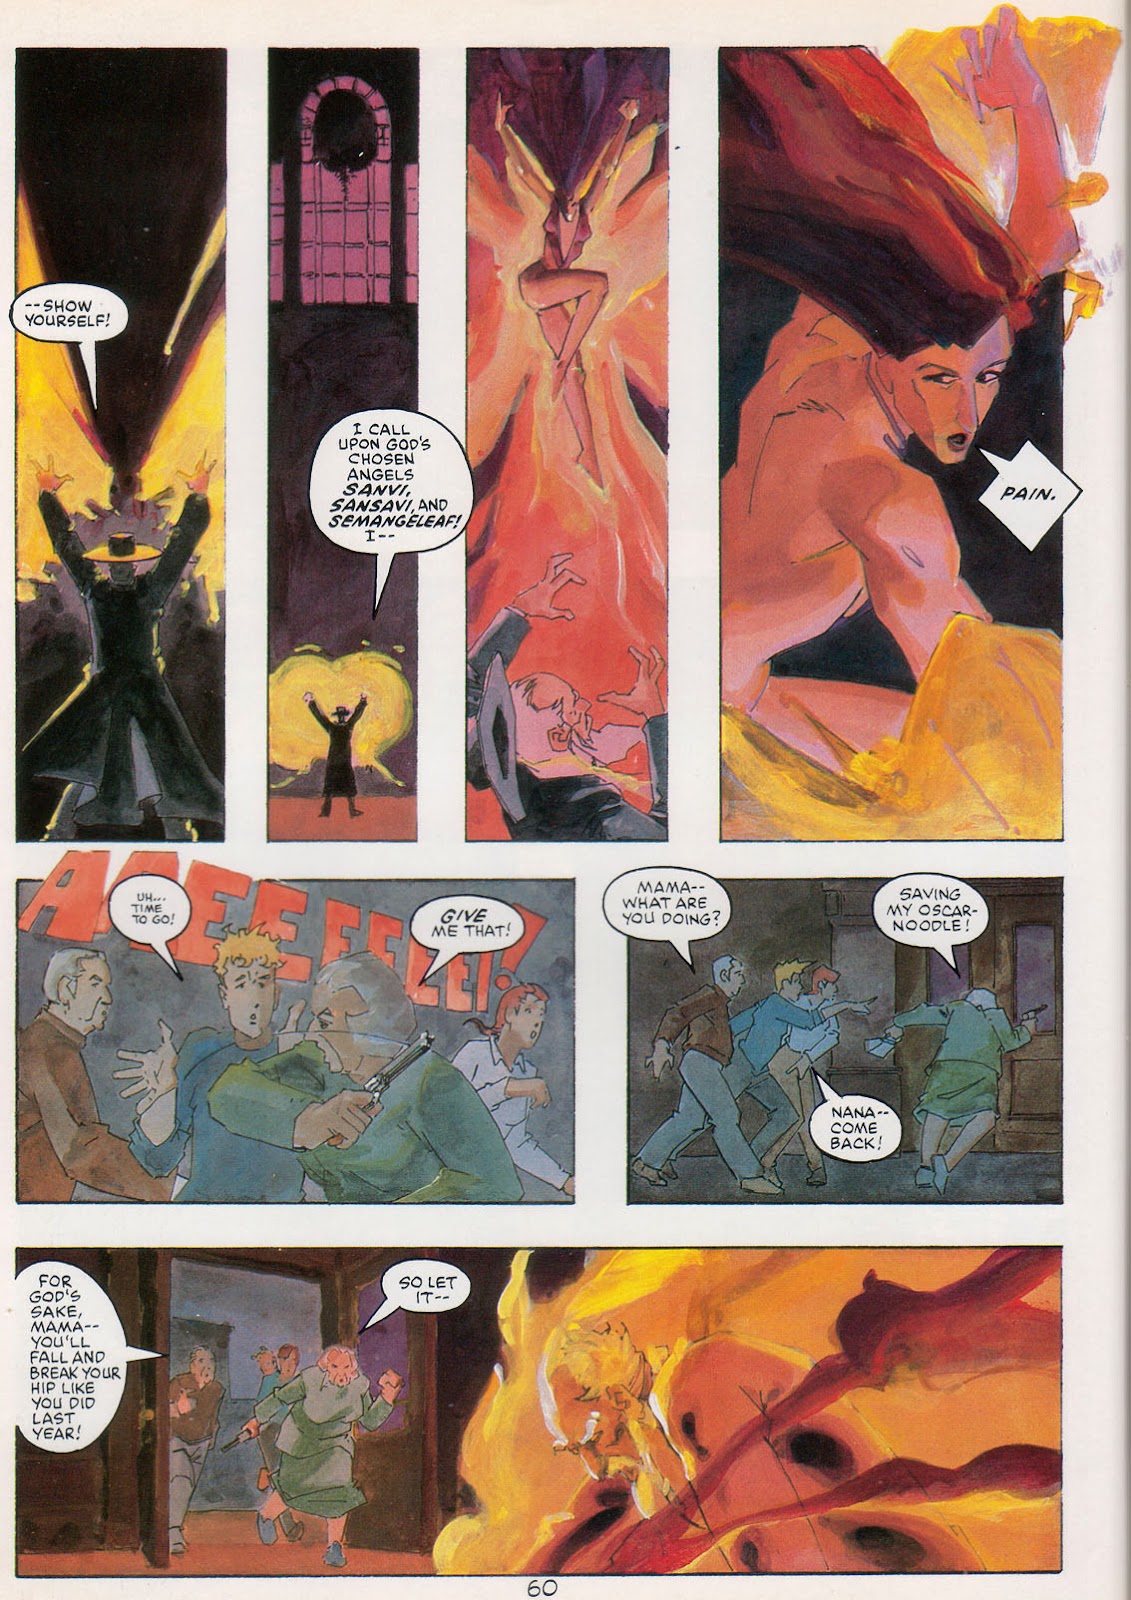 Marvel Graphic Novel issue 20 - Greenberg the Vampire - Page 64